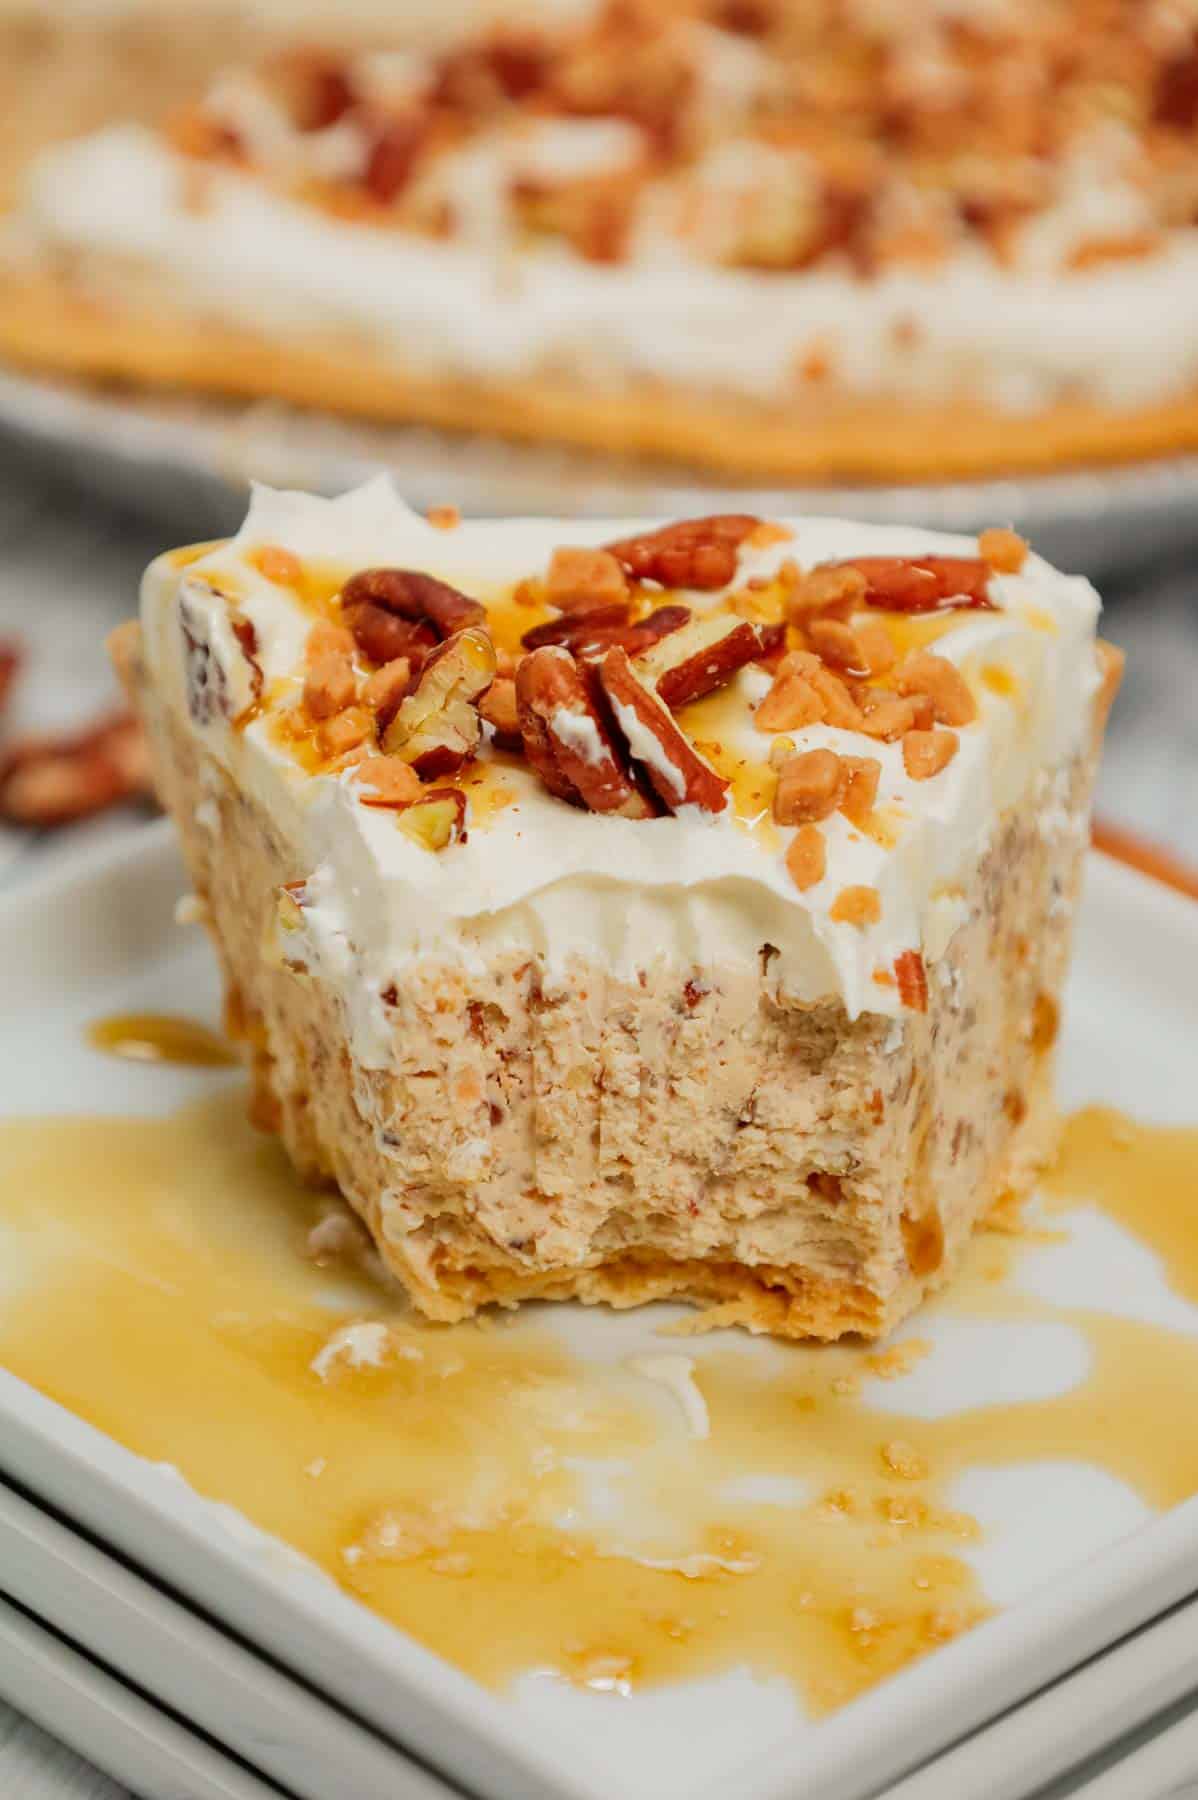 Pecan Cream Pie is an easy dessert recipe using a store bought pie crust and a filling made from cream cheese, crushed pecans, toffee bits, maple syrup, brown sugar and Cool Whip.